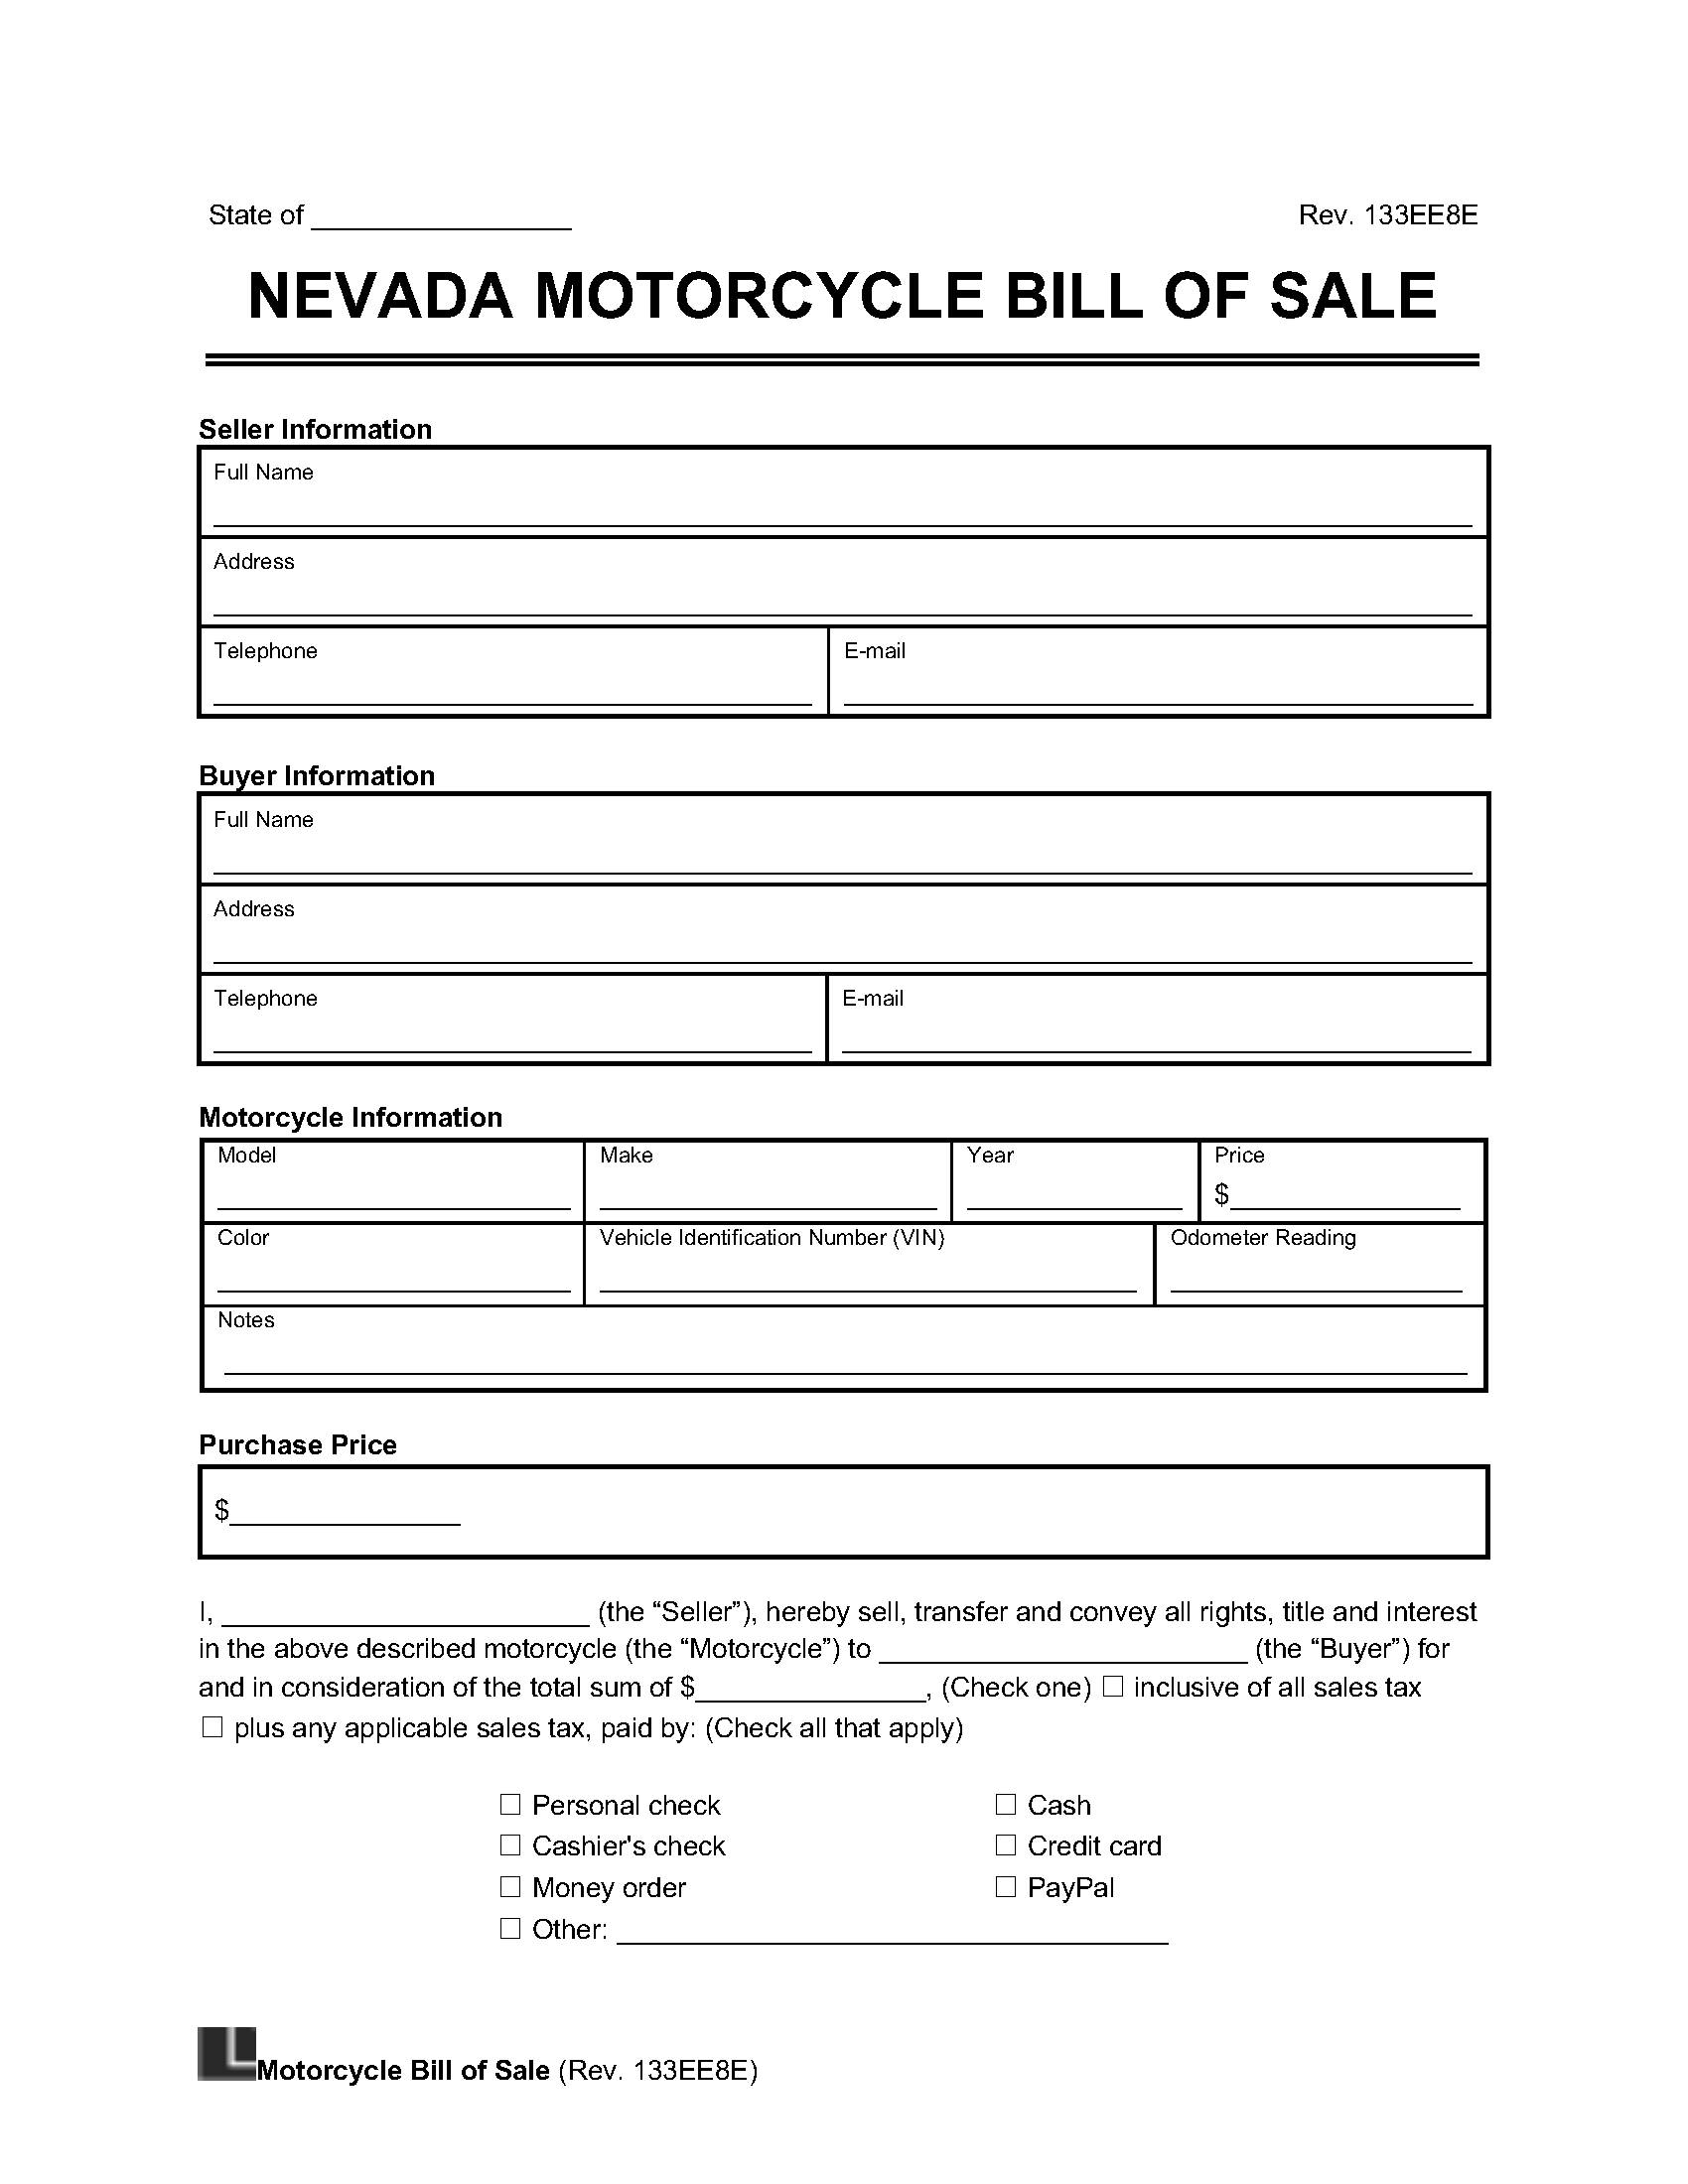 nevada motorcycle bill of sale